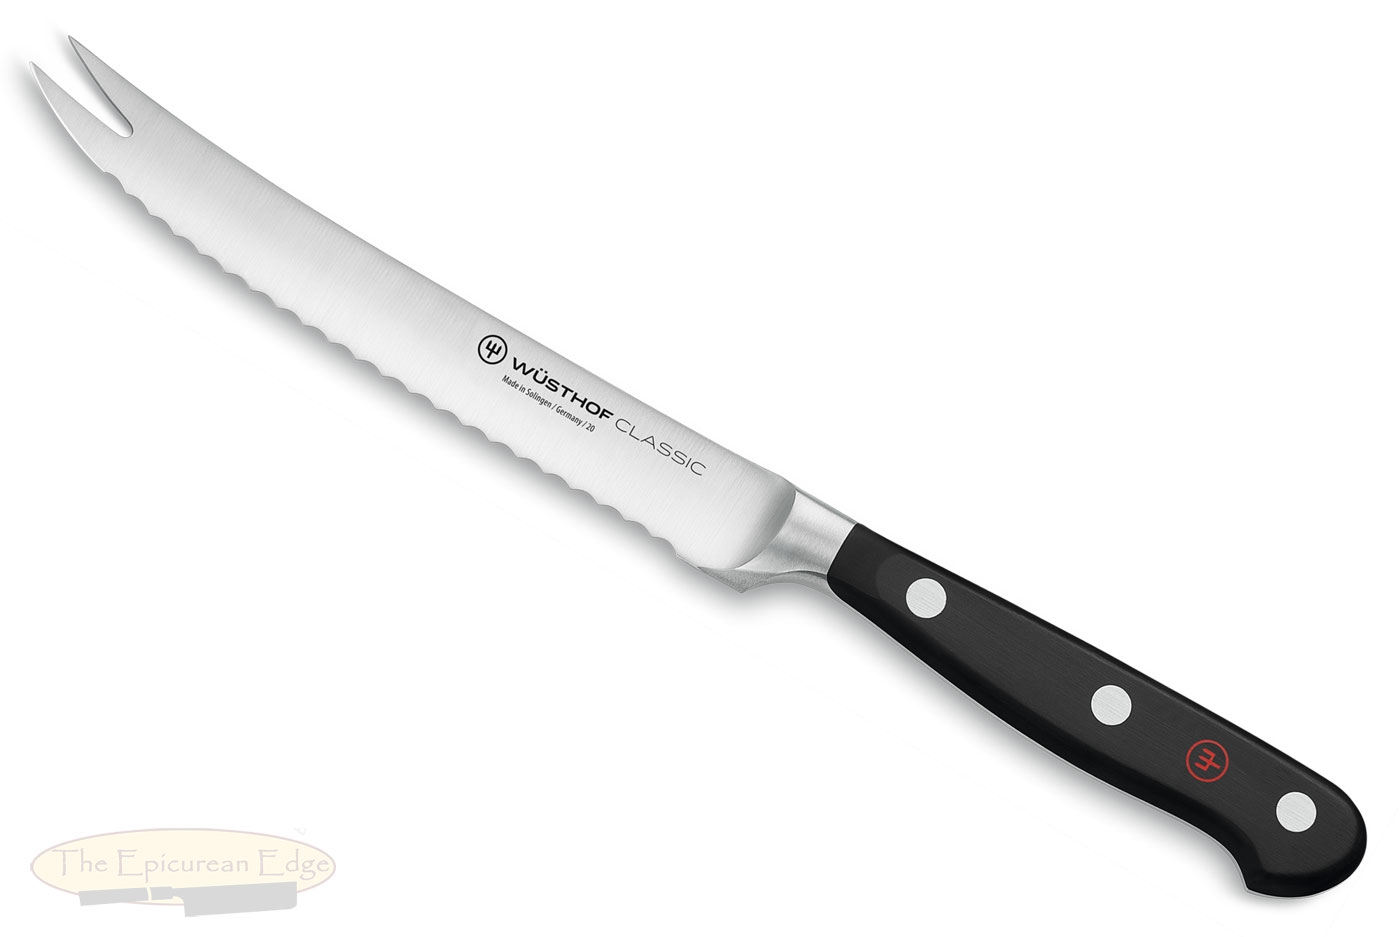 Wusthof-Trident Classic Serrated Tomato Knife - 5 in. (1040101914)